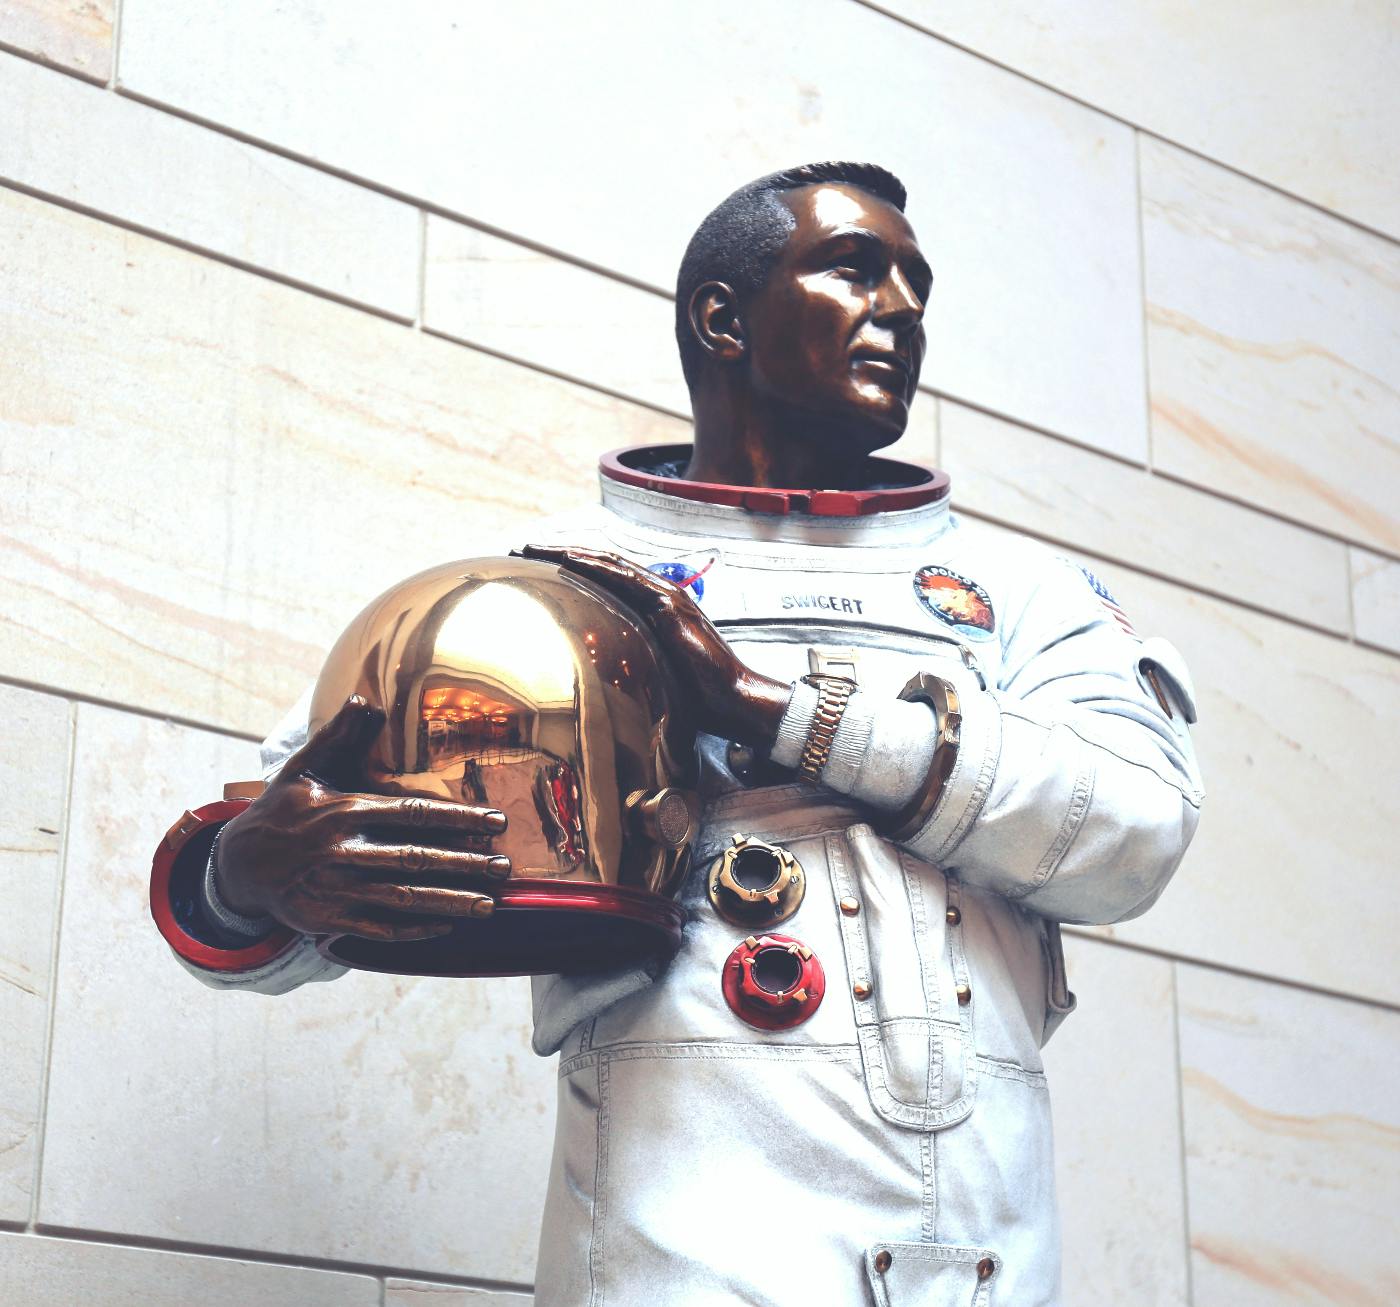 A statue of Atronaut Jack Swigert in his space suit